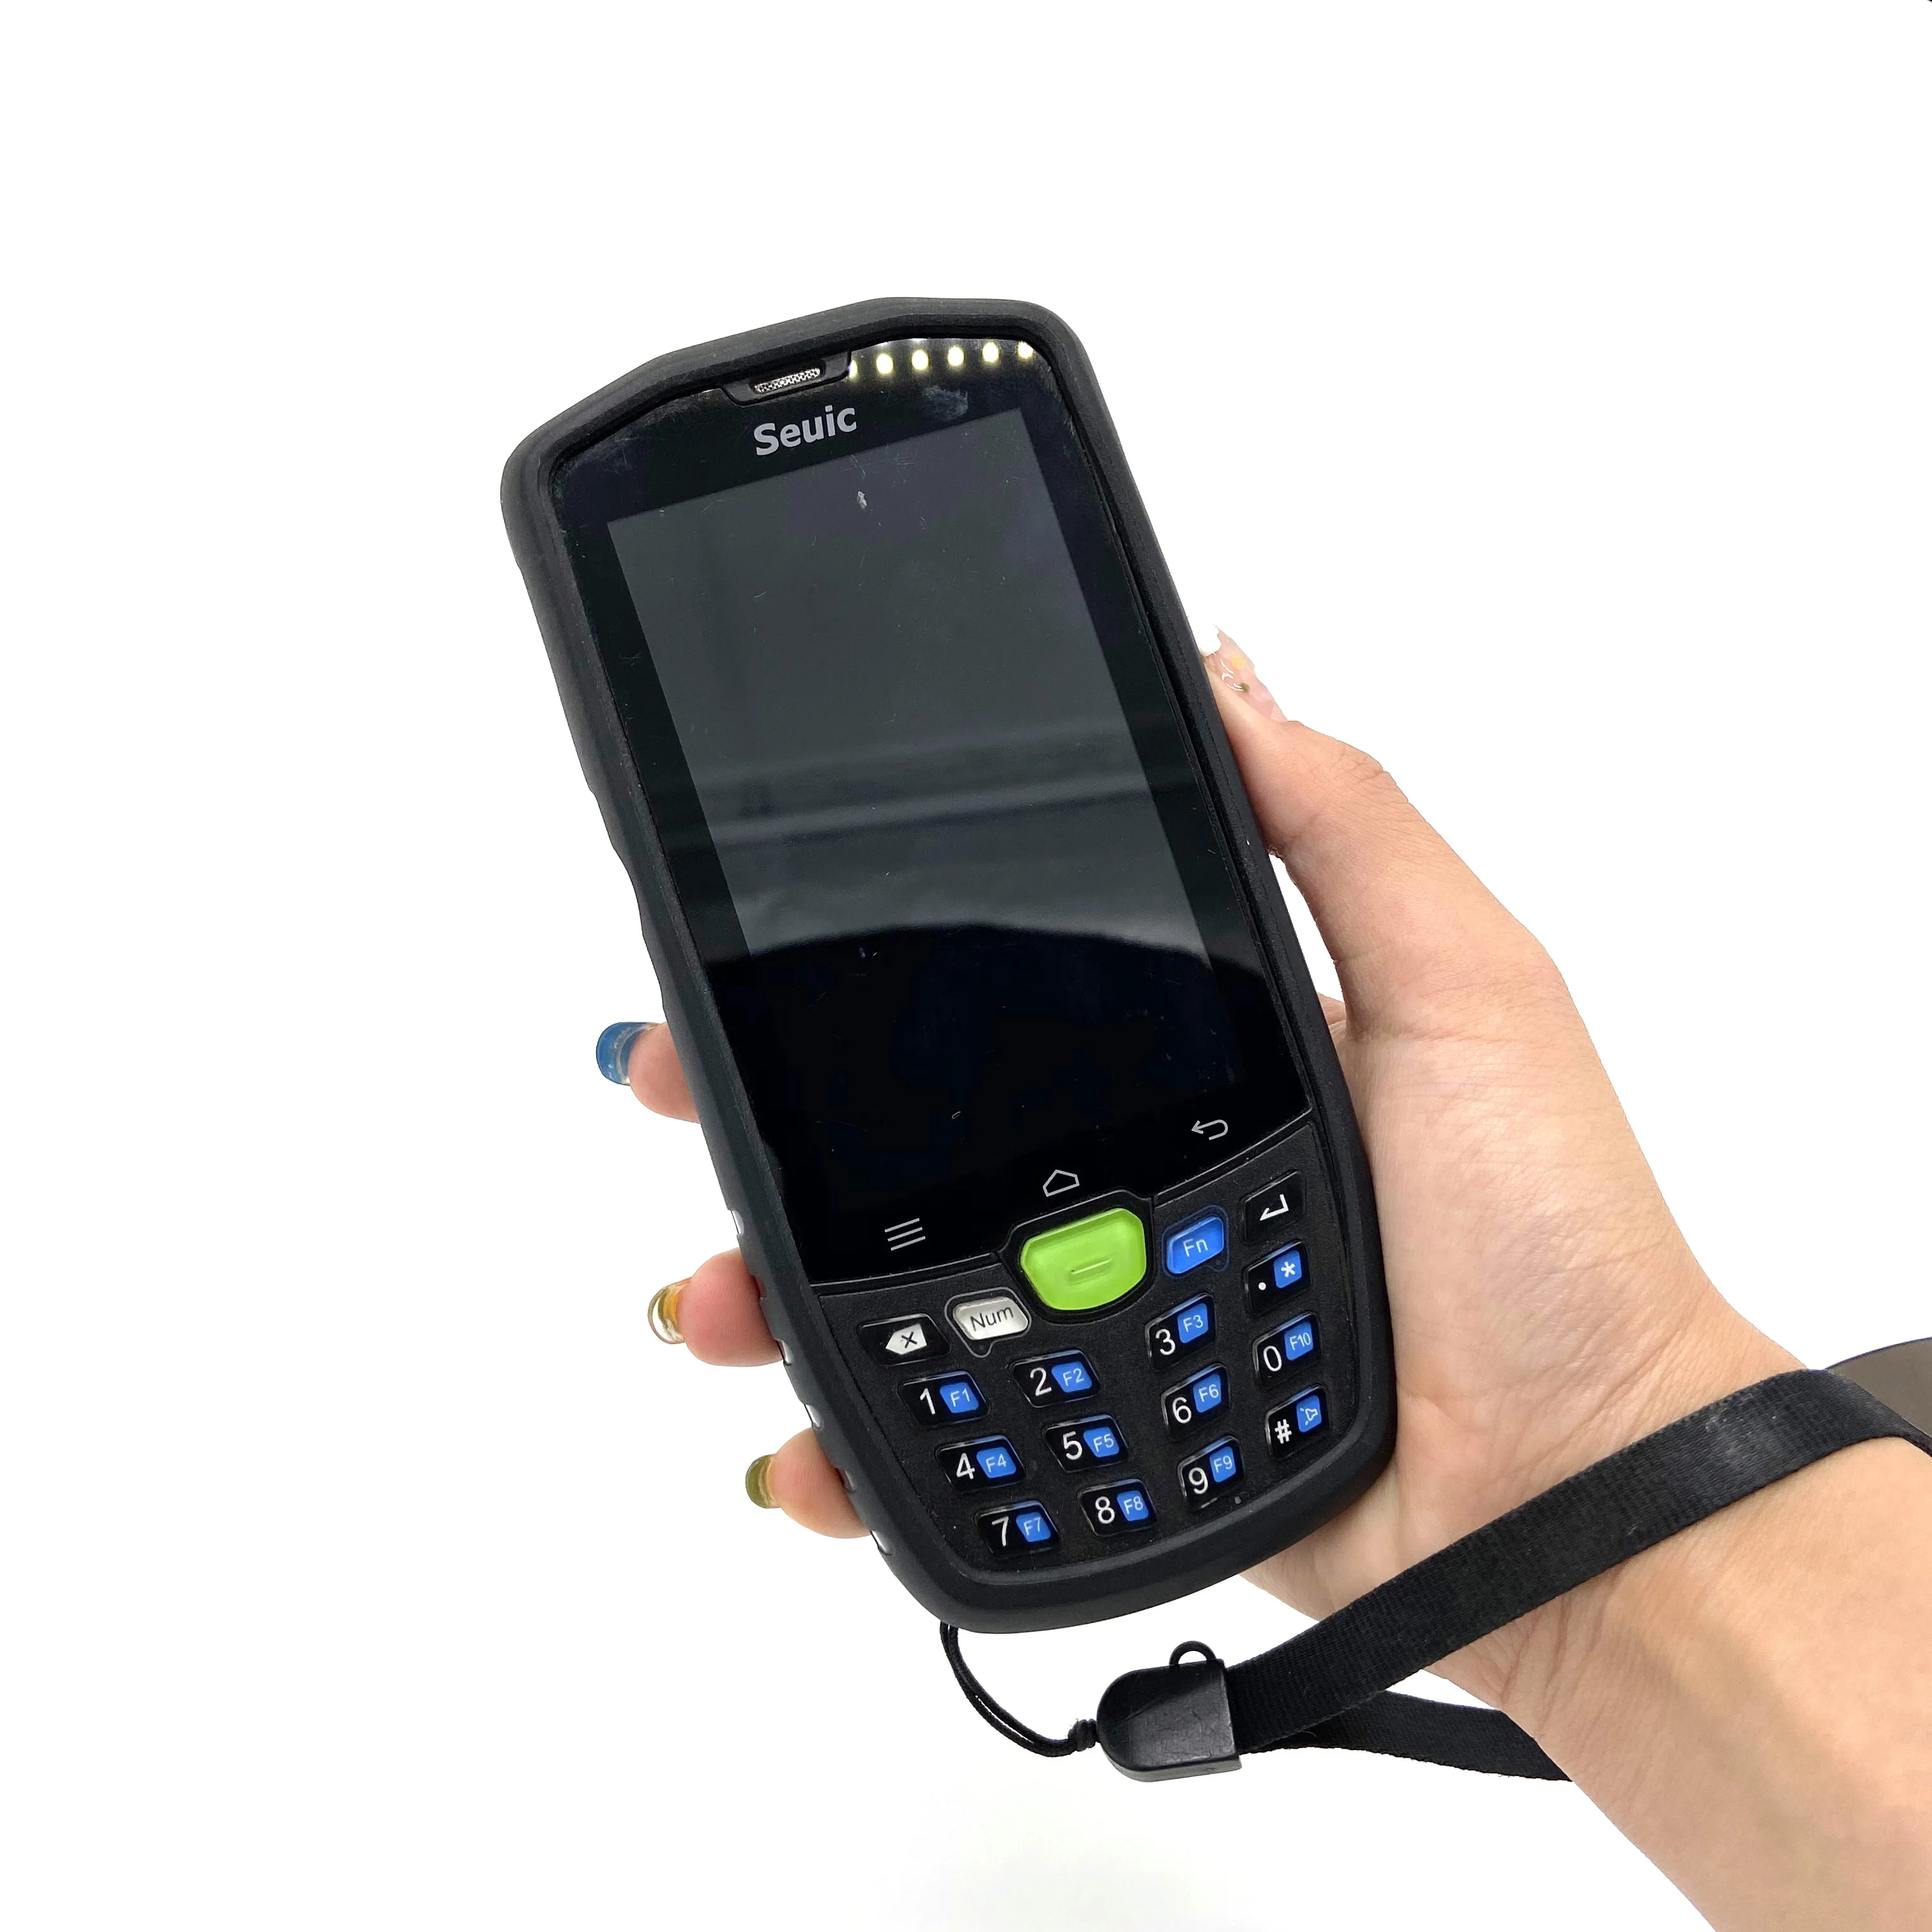 

Factory Autoid 9 rugged android handheld mobile terminal car pda 1D 2D qr barcode scanner with CE FCC RoHS CCC Certificate pdas